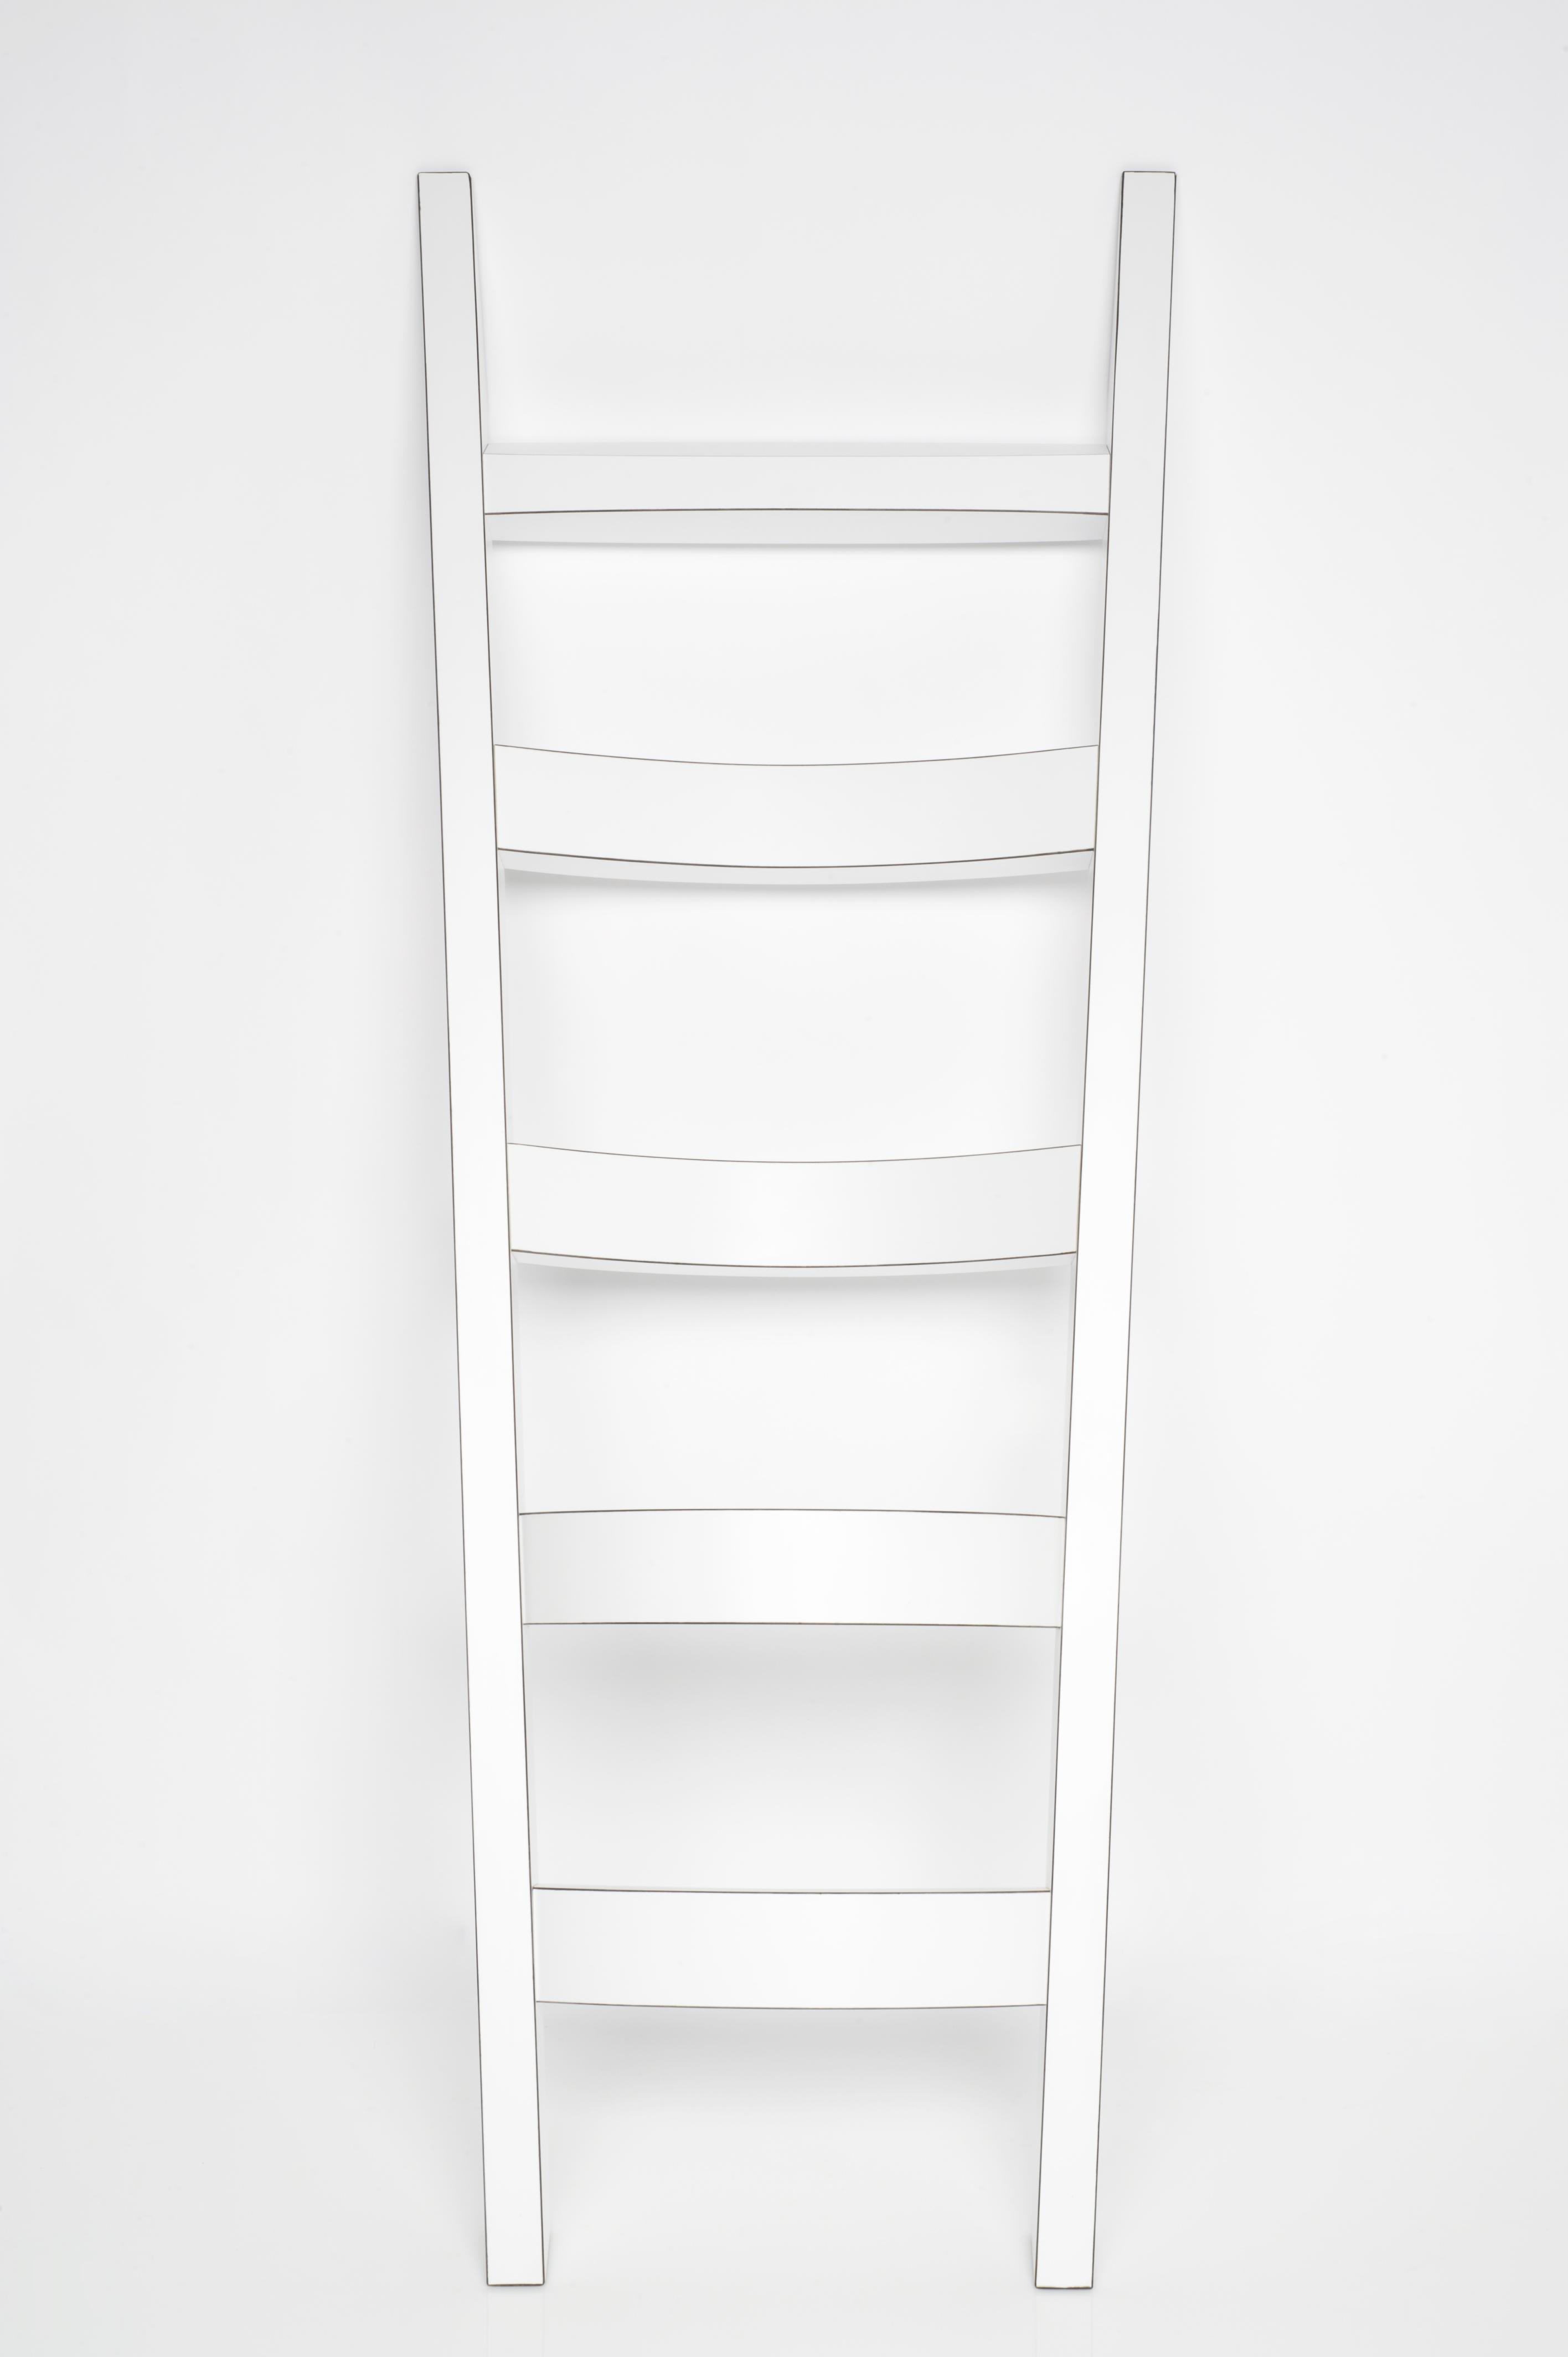 A ladder designed to sit on.